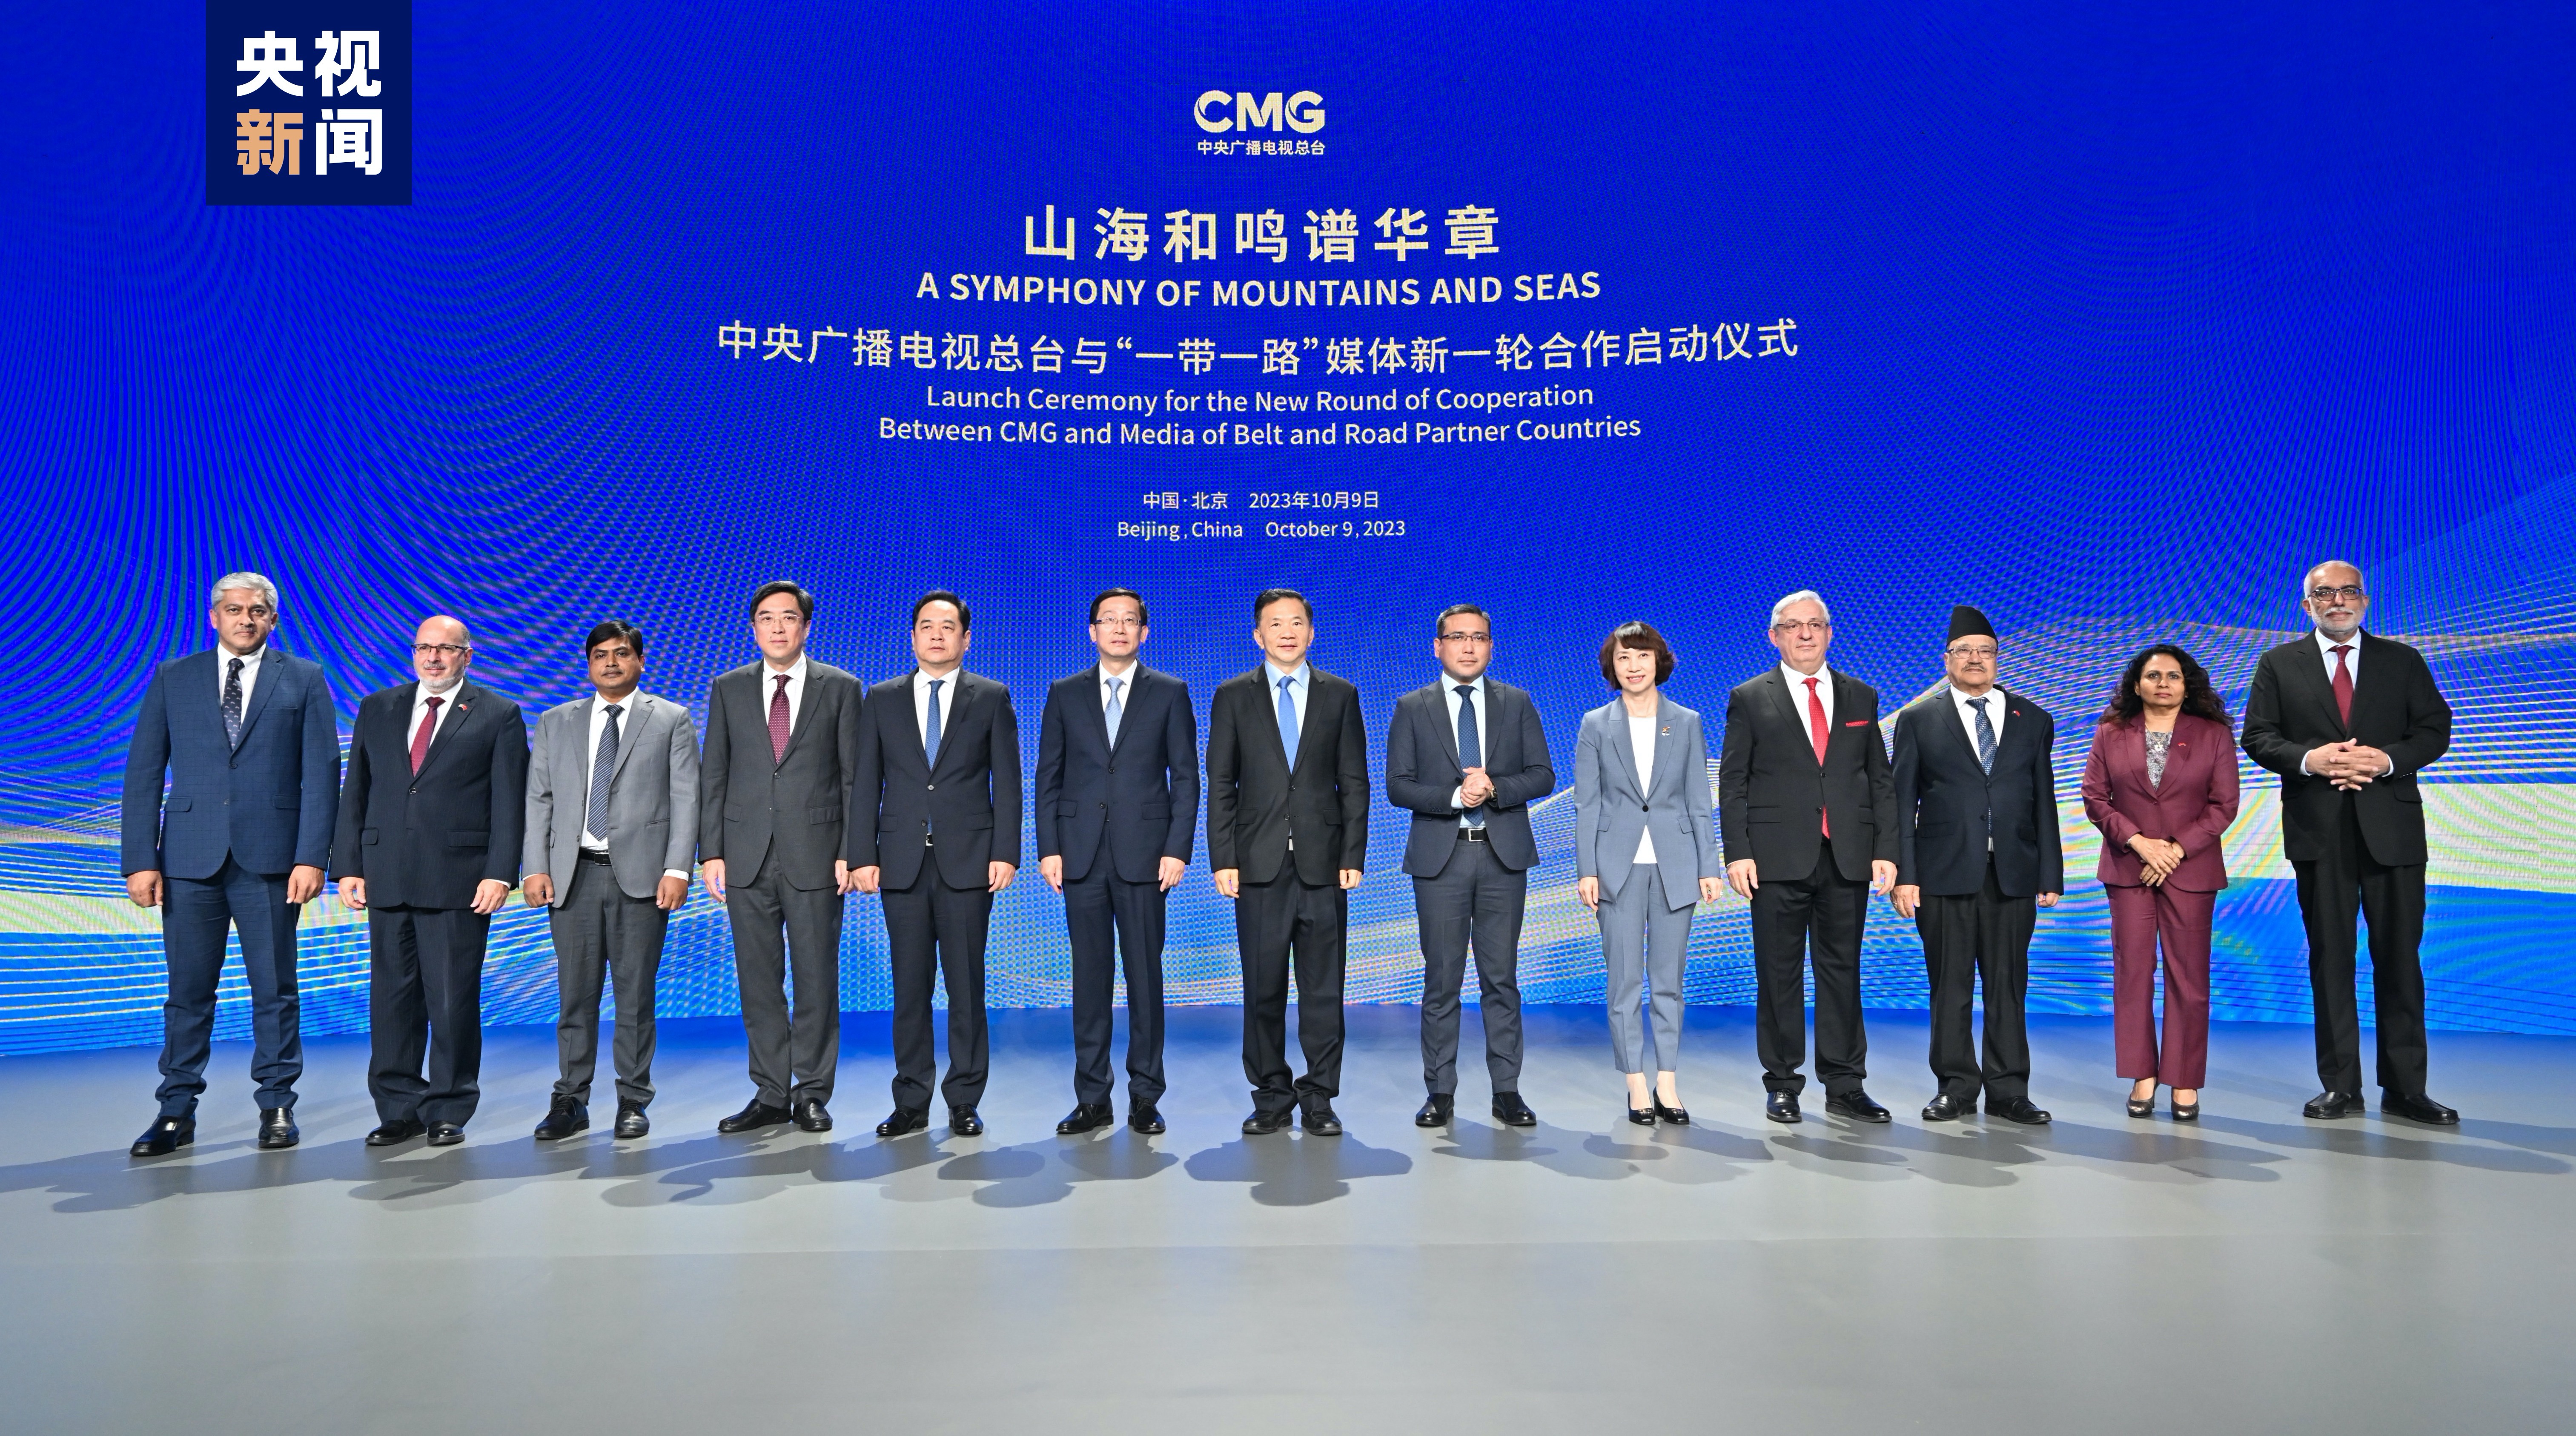 The launch ceremony for a new round of cooperation between CMG and media of Belt and Road partner countries, Beijing, China, October 9, 2023. /CMG